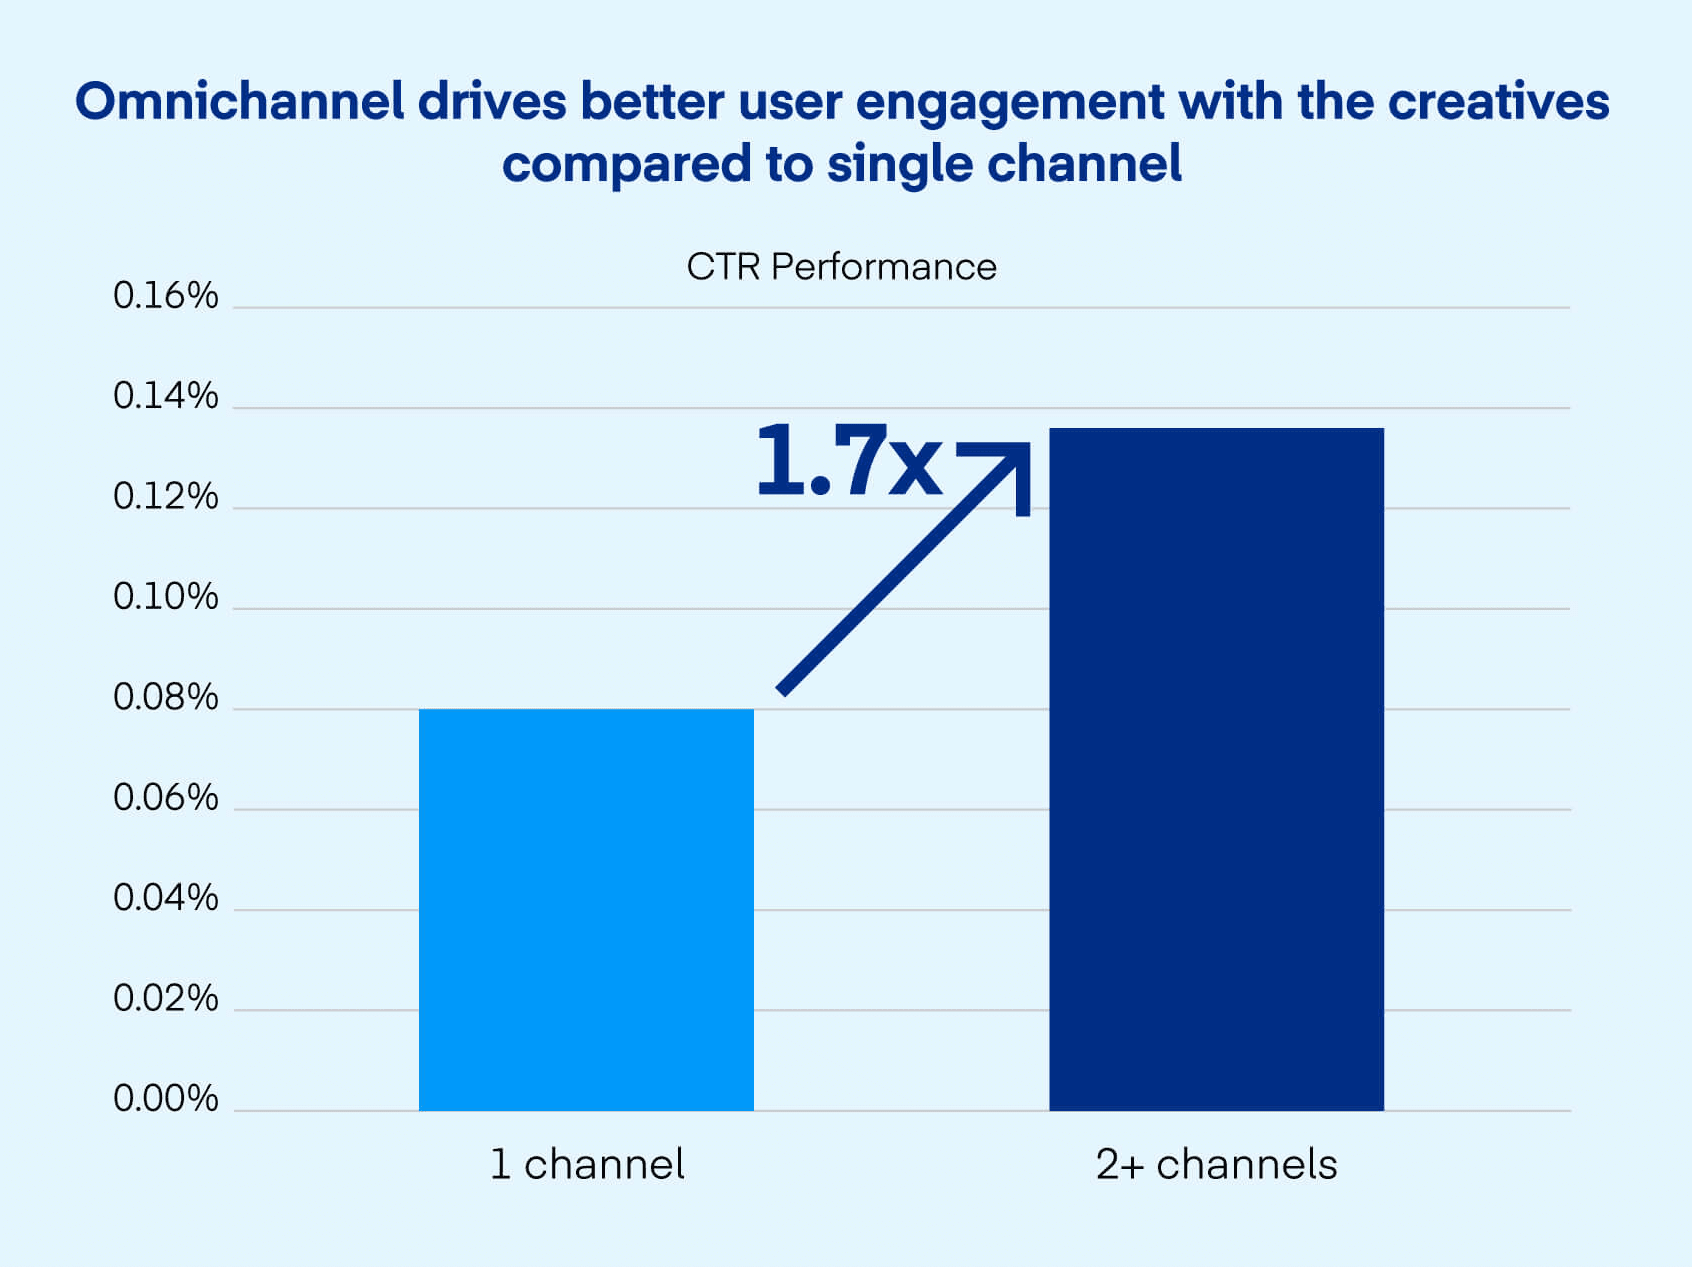 Omnichannel drives better user engagement with the creatives compared to single channel